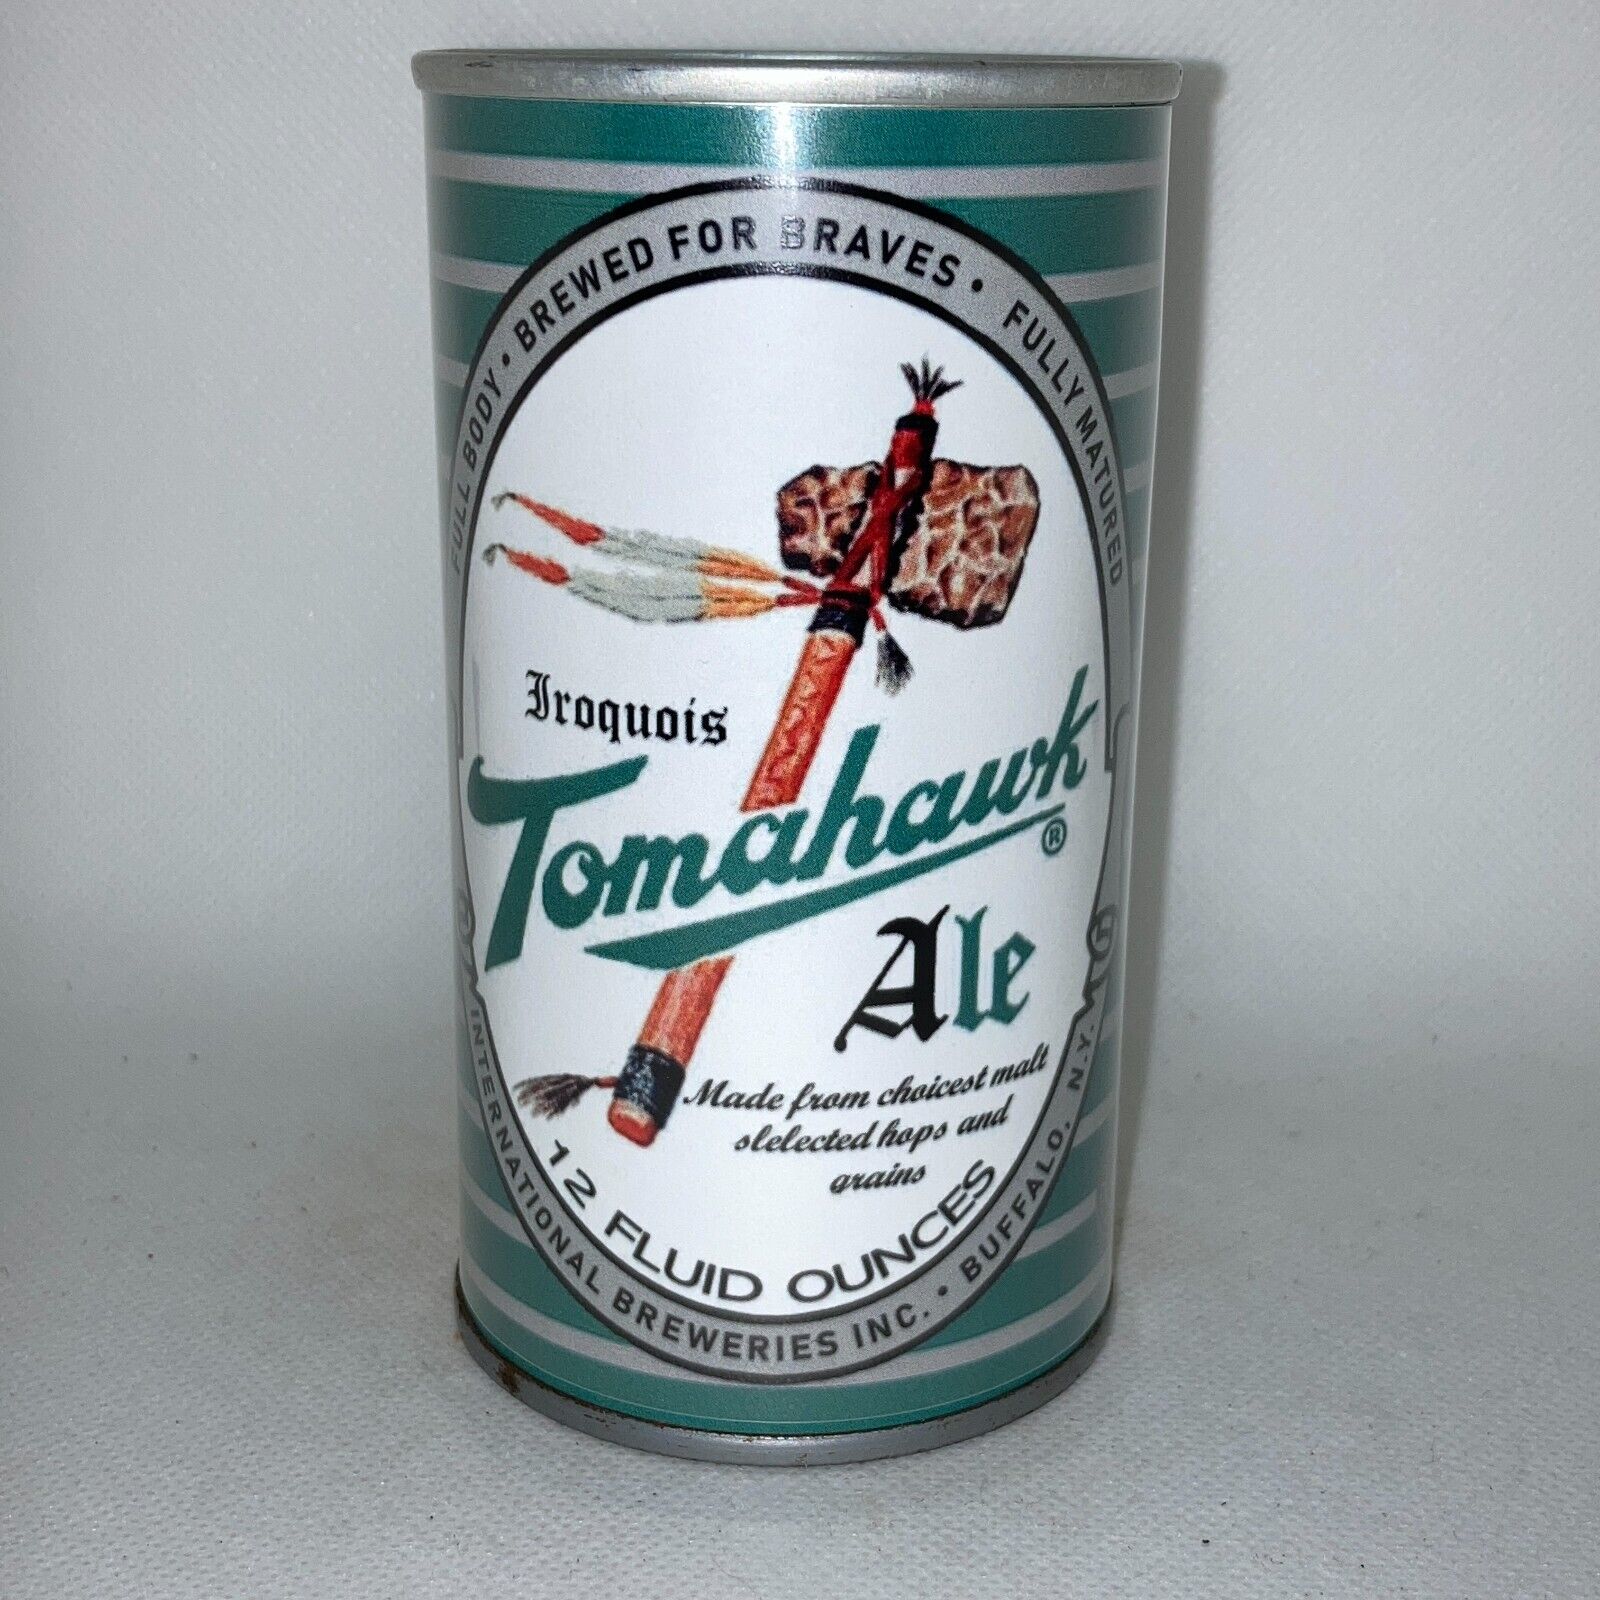 Iroquois Tomahawk Ale REPLICA / NOVELTY beer can, paper label